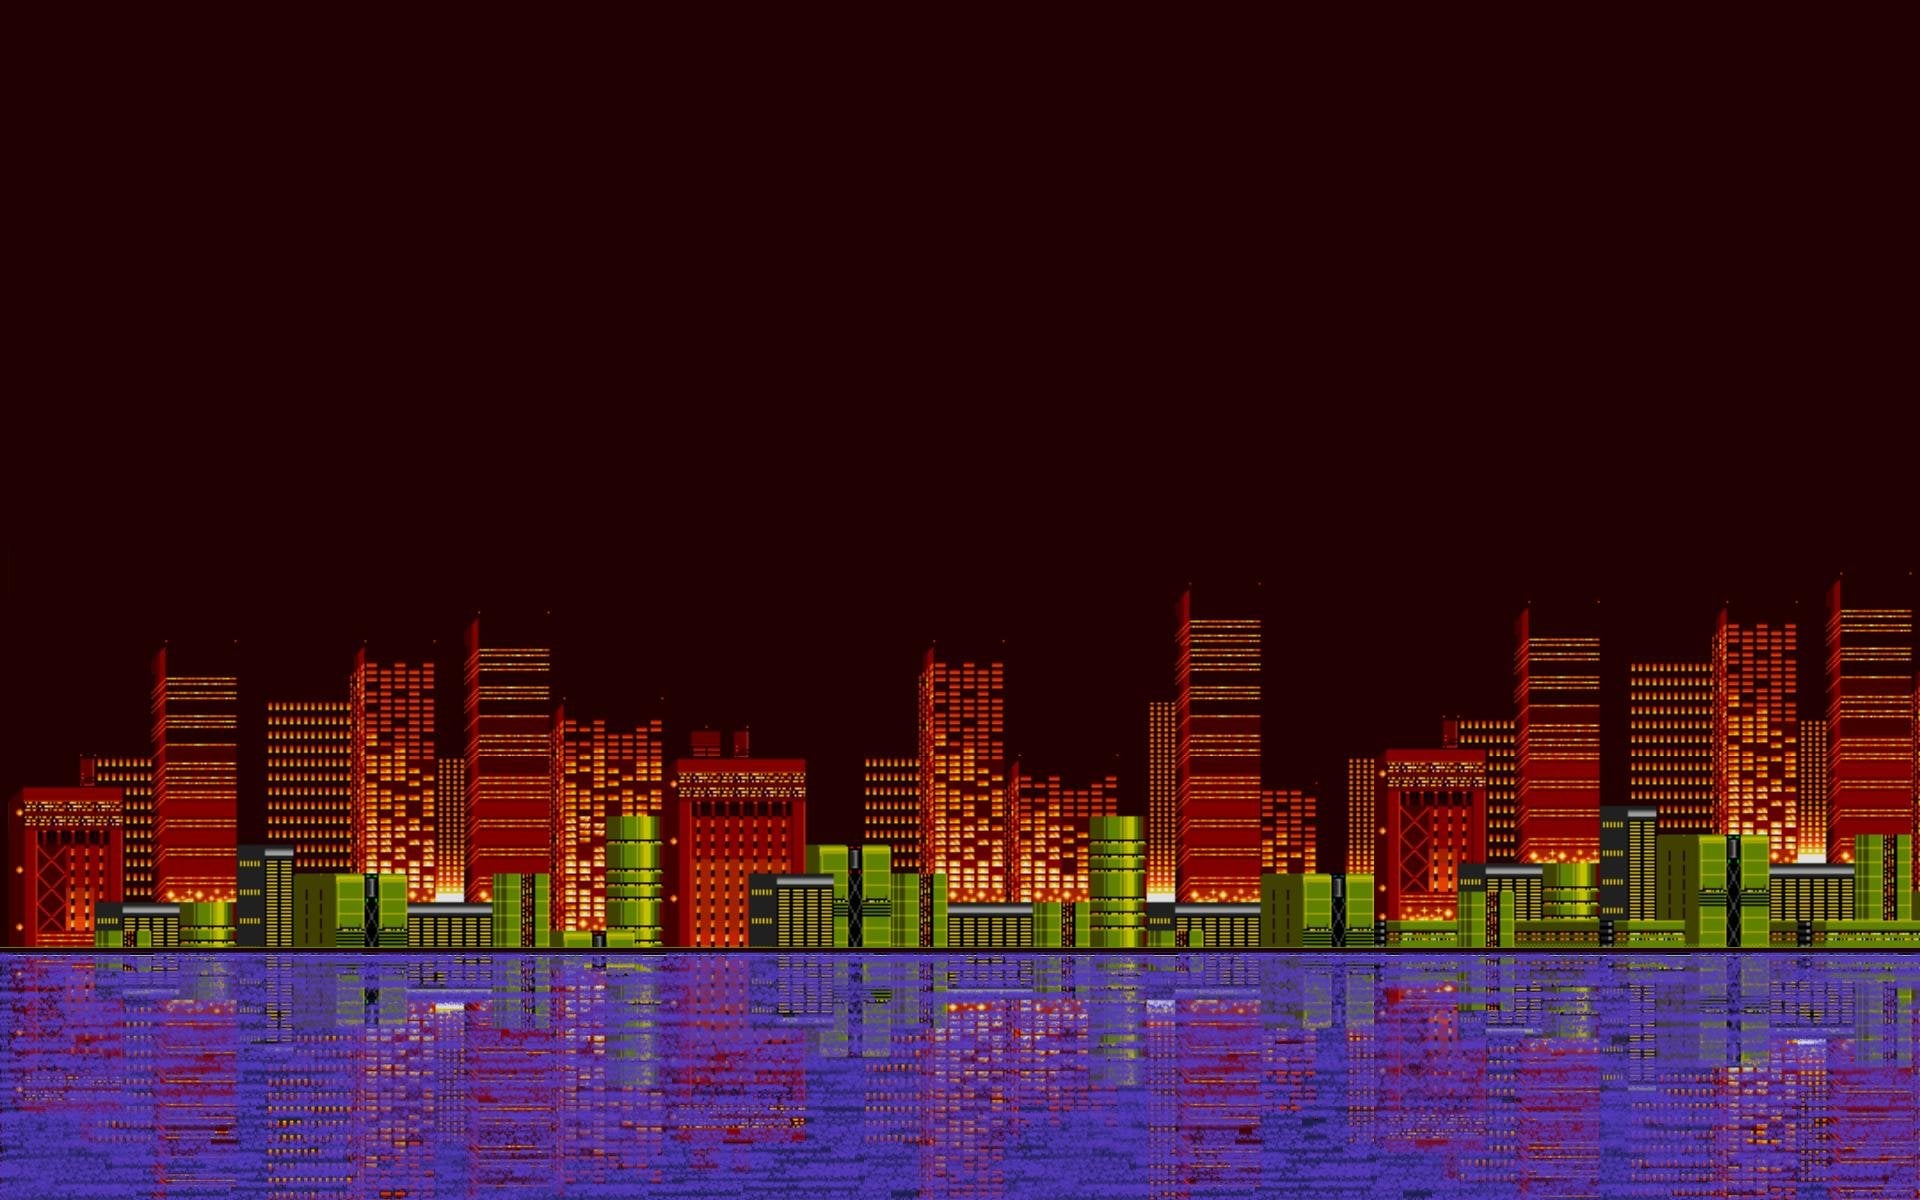 Looking for some Sonic3&K wallpaper